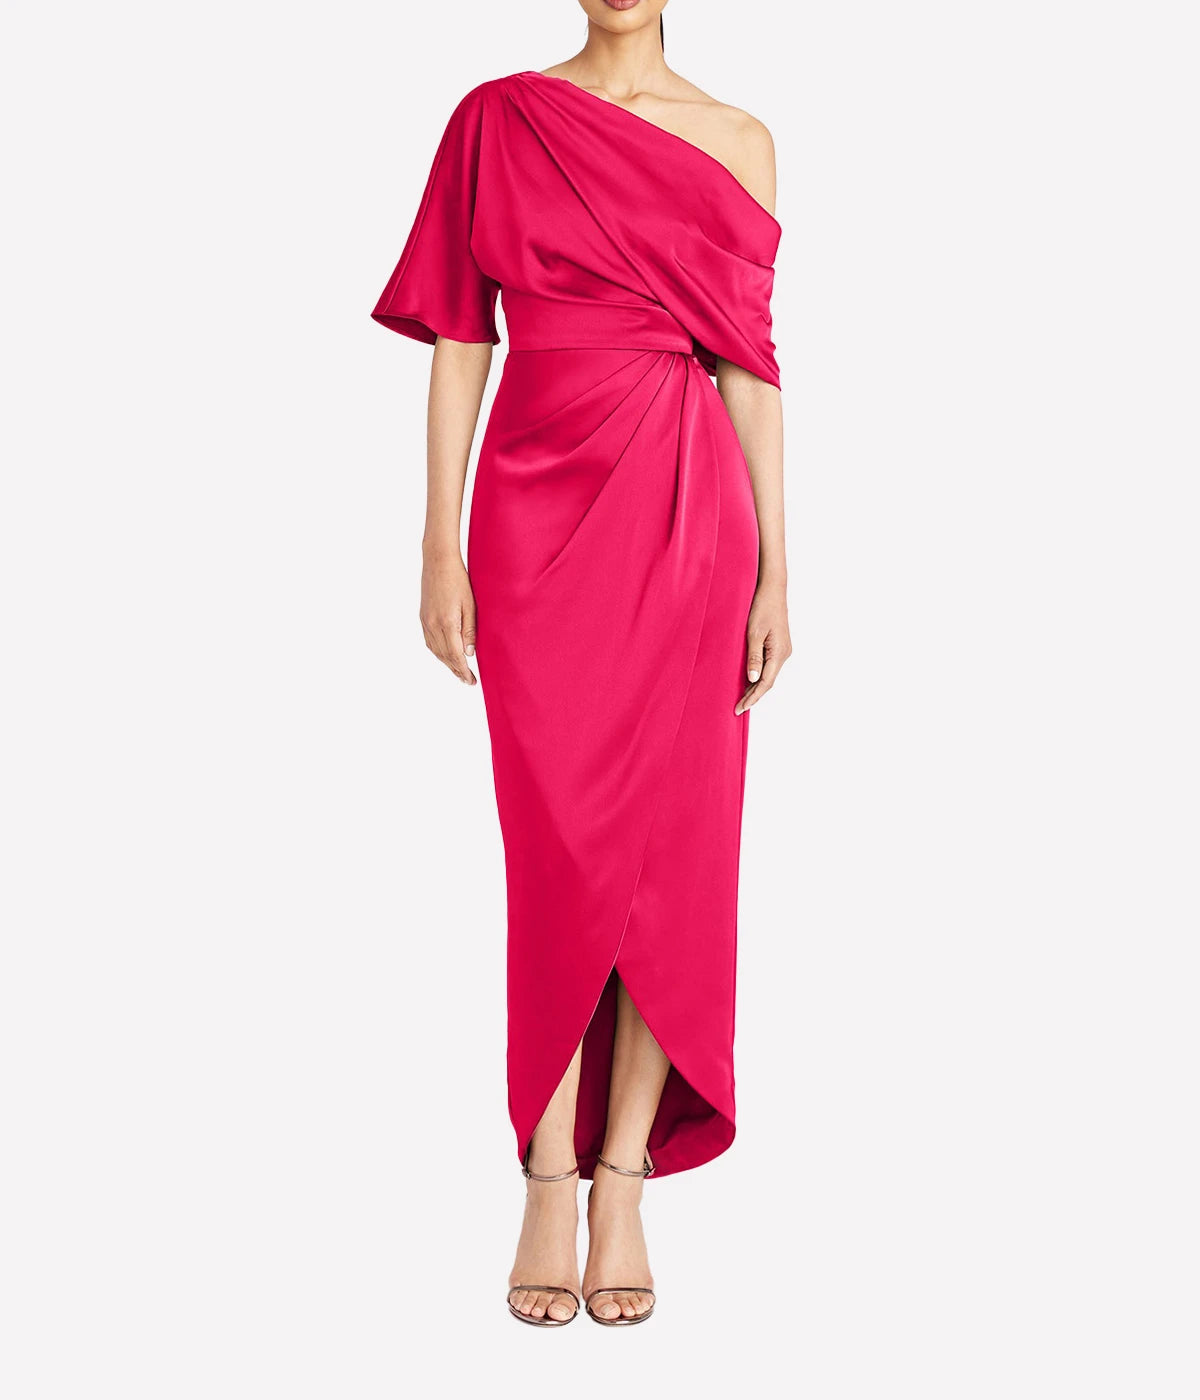 Rayna One Shoulder Draped Gown in Passionfruit